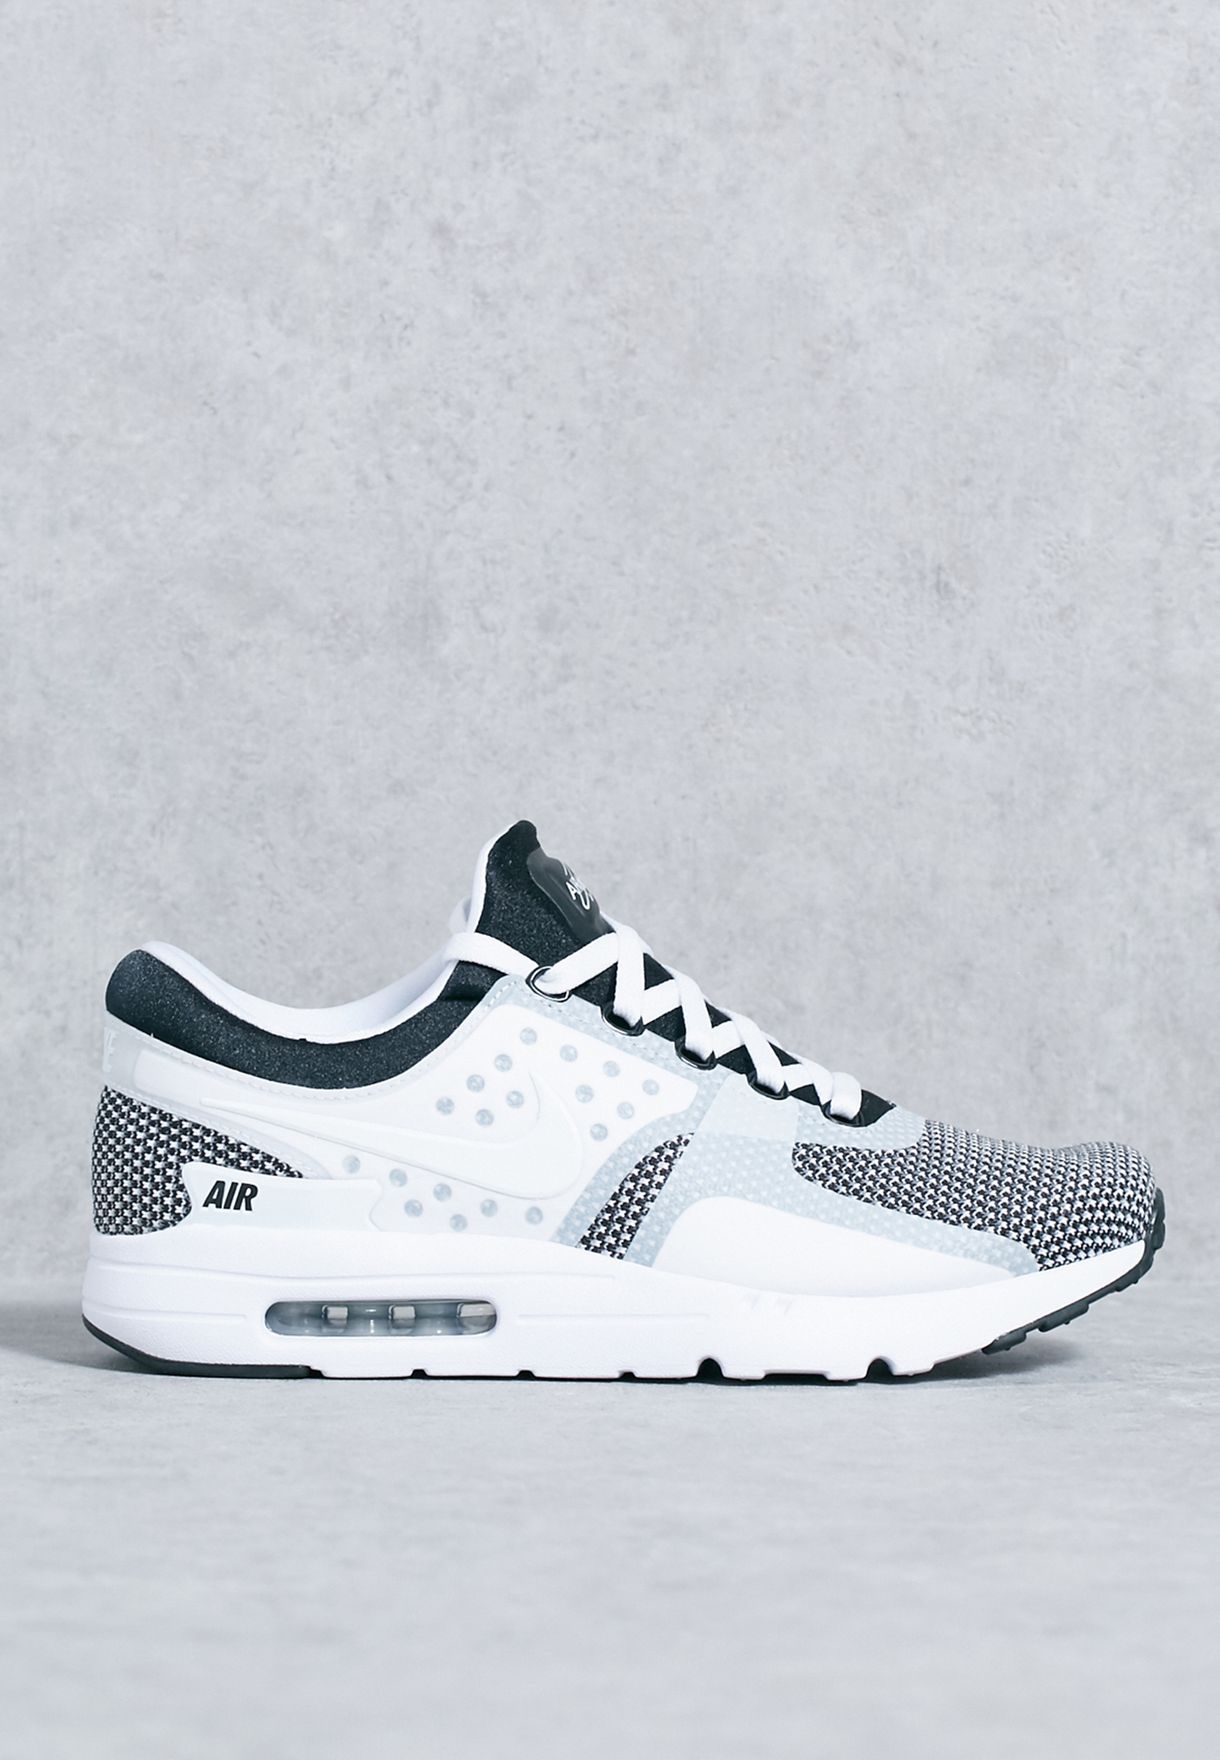 Buy Nike Air Max Zero for in Doha, other cities